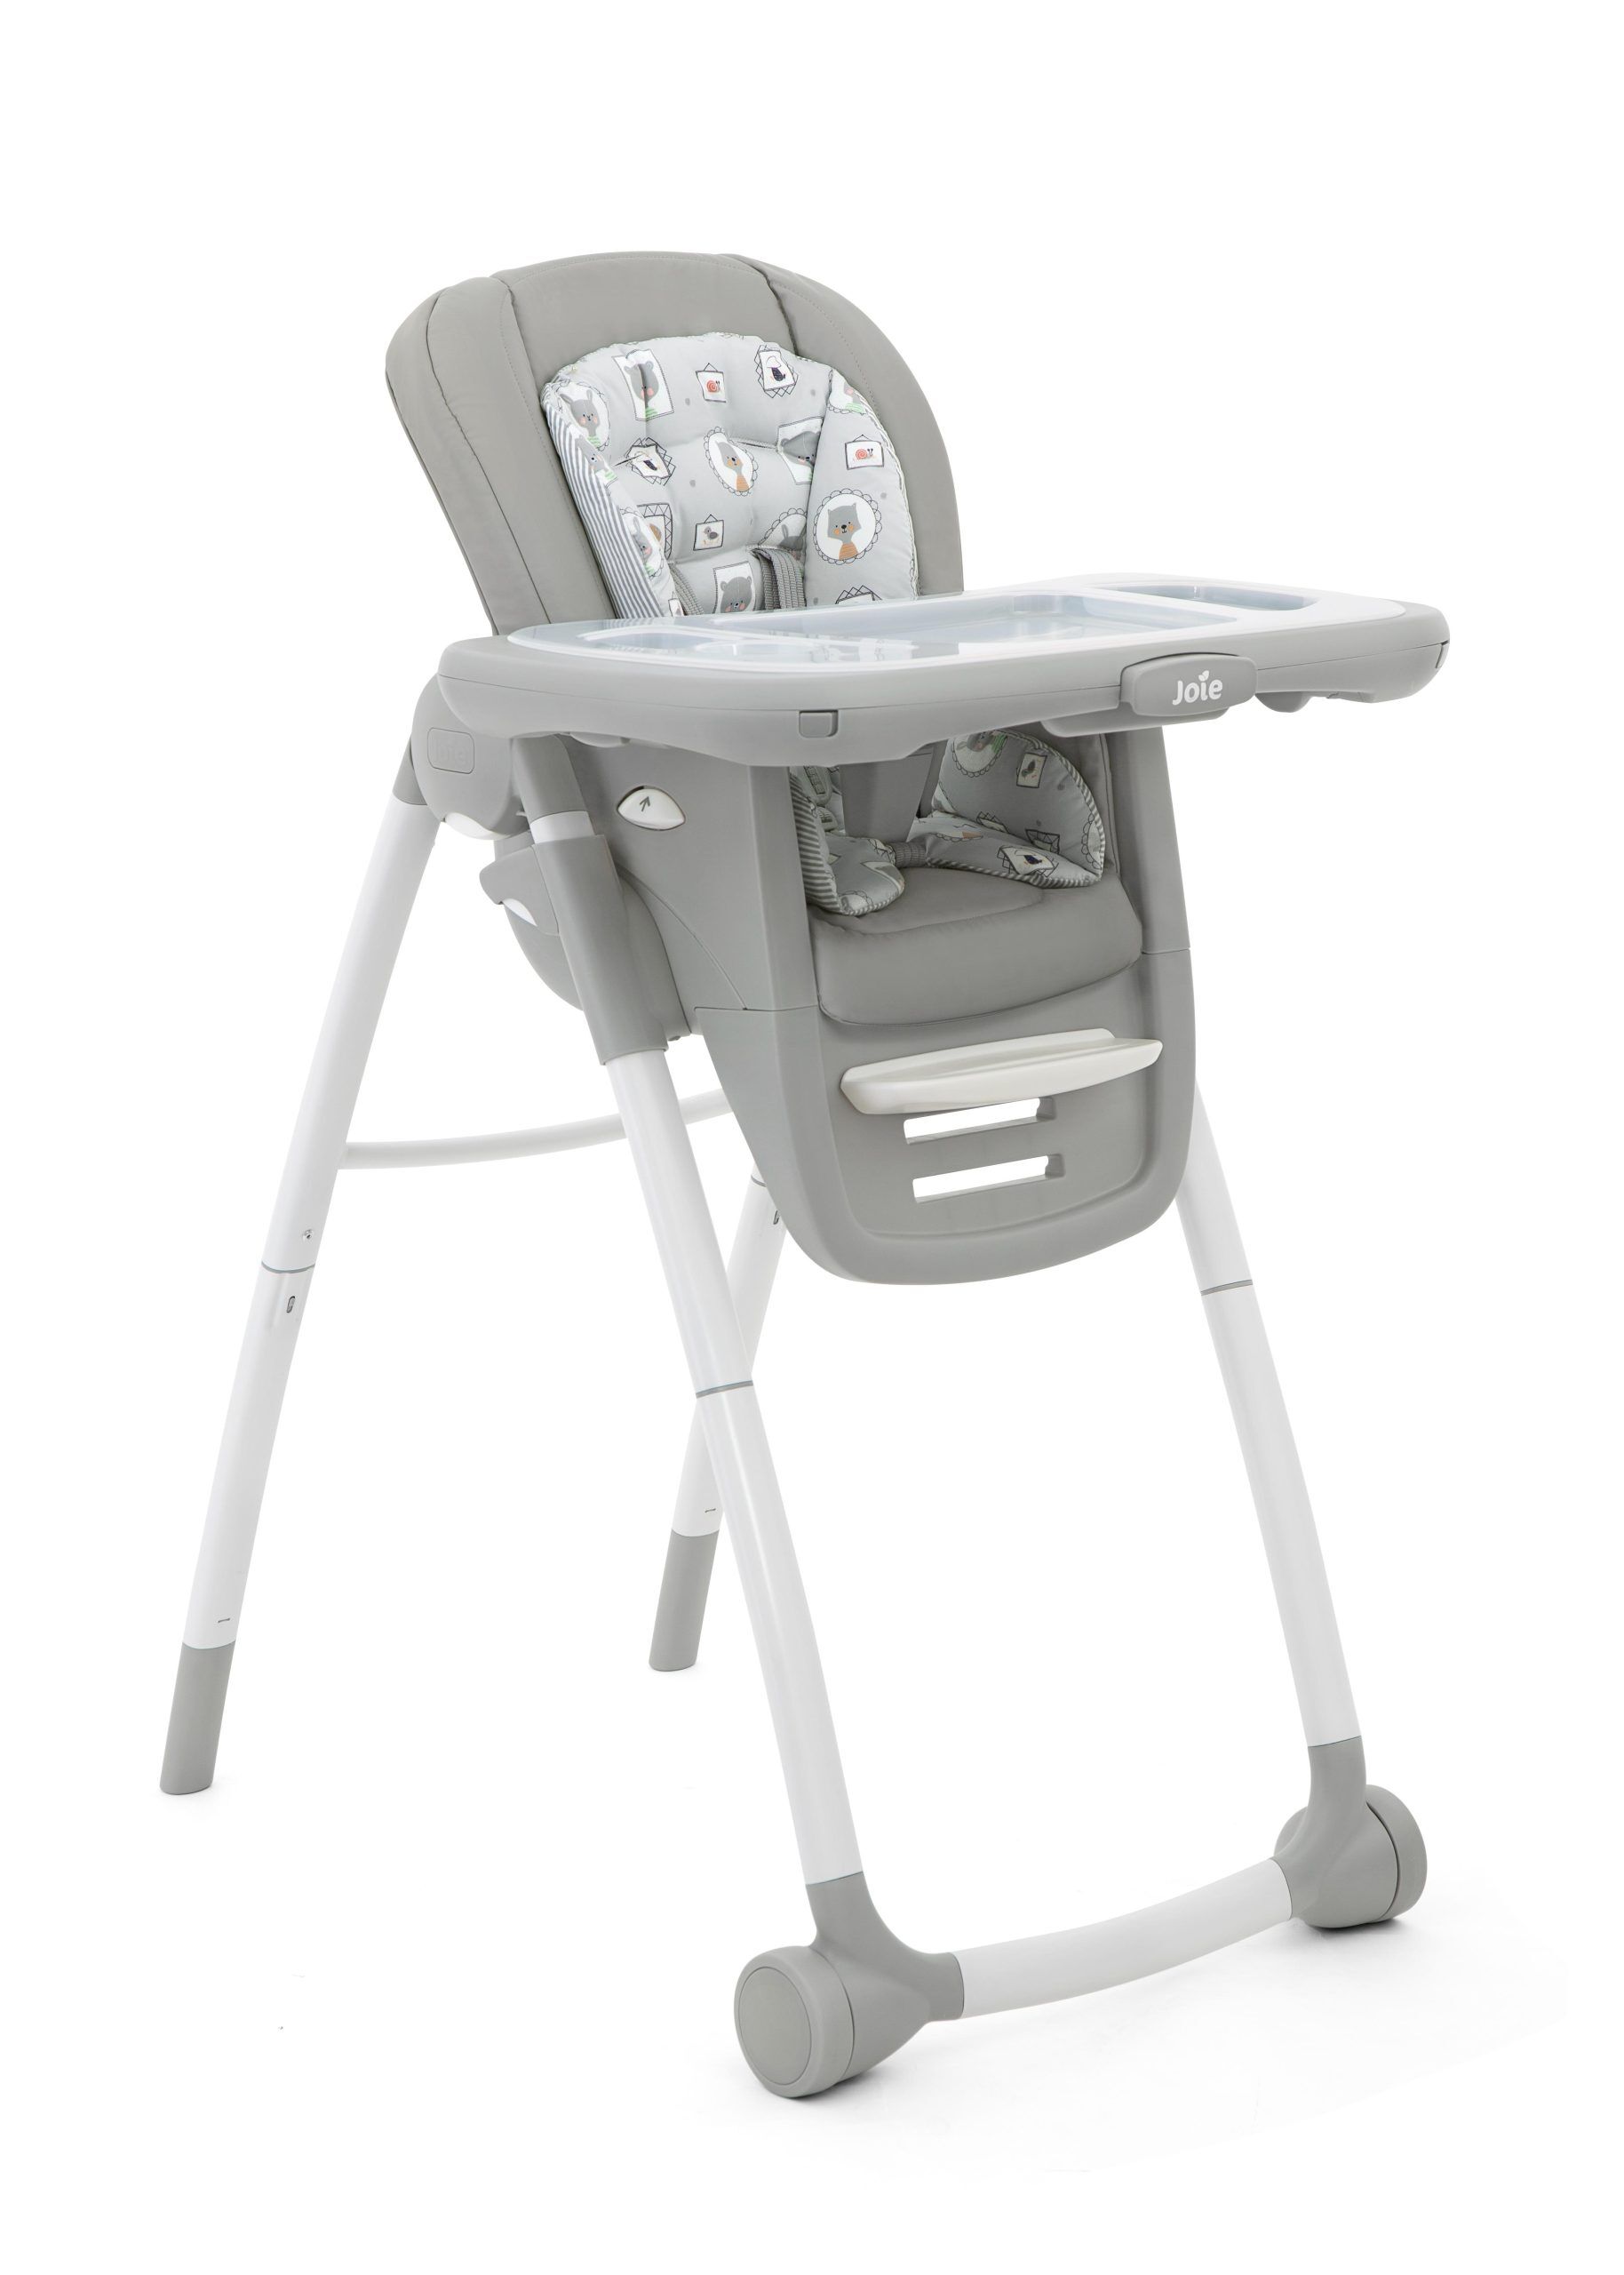 Joie Seggiolone Pappa Multiply 6in1 (H1605AAPOR000)